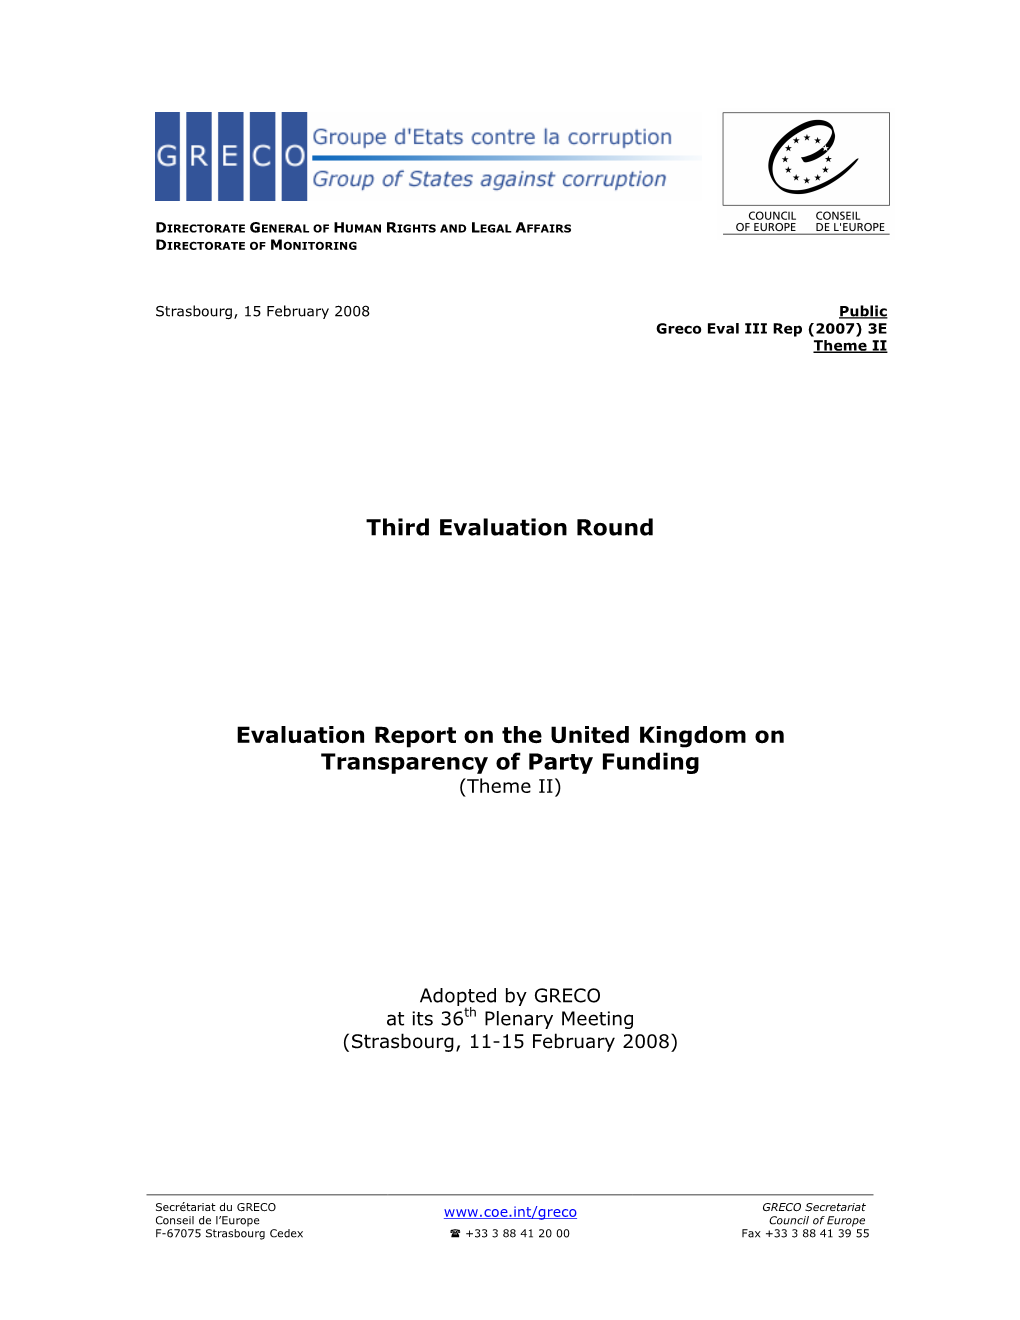 Third Evaluation Round Evaluation Report on the United Kingdom On